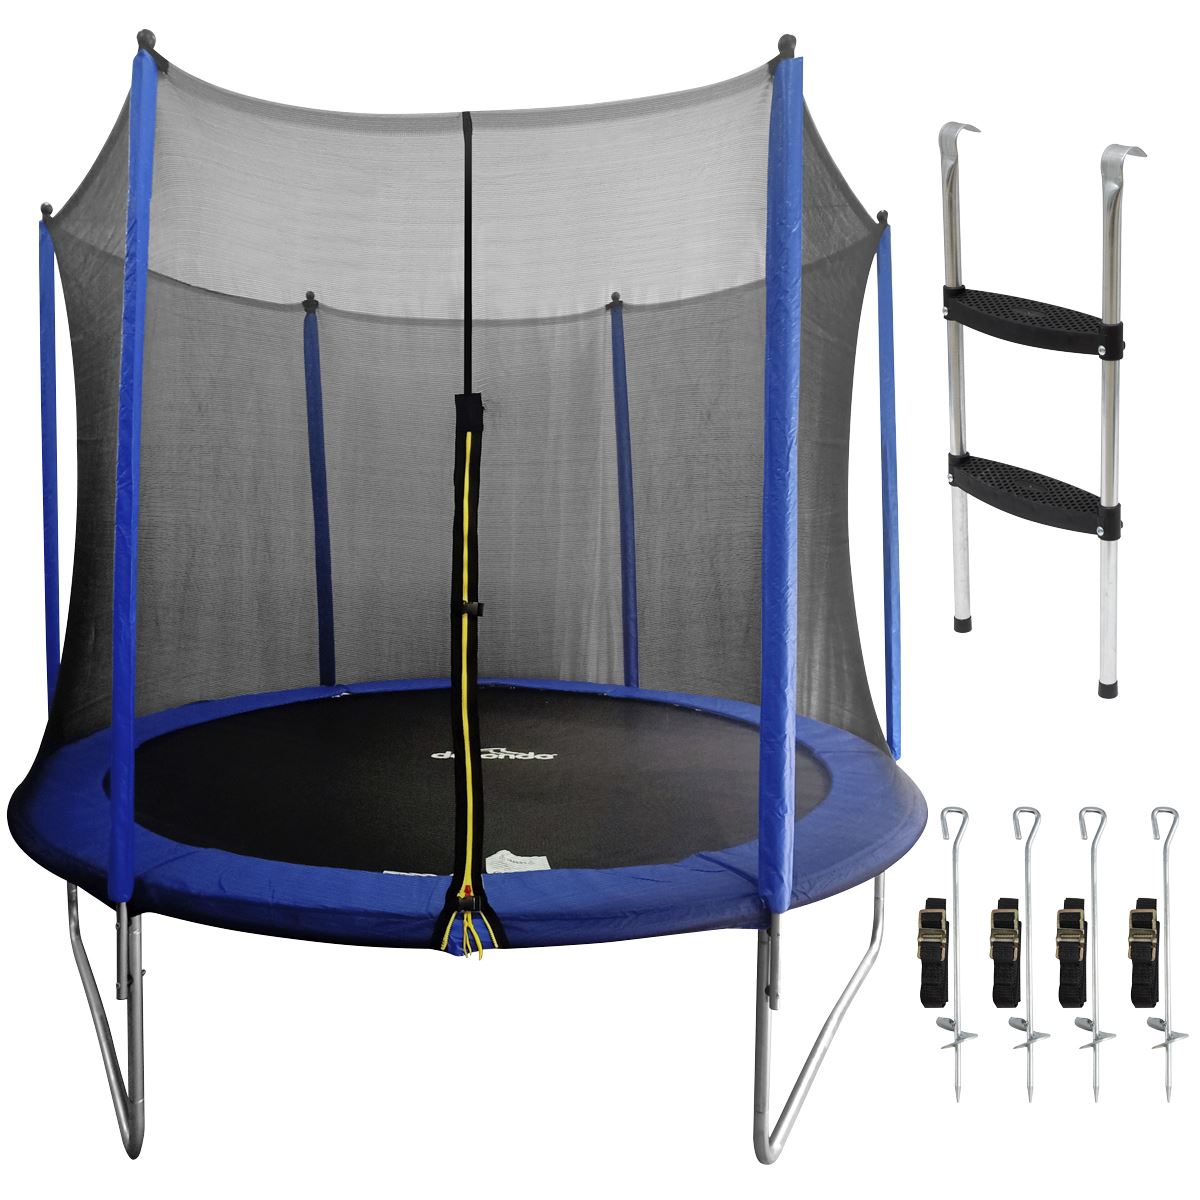 Dellonda 10ft Heavy-Duty Outdoor Trampoline for Kids with Safety Enclosure Net, Includes Anchor Kit & Ladder